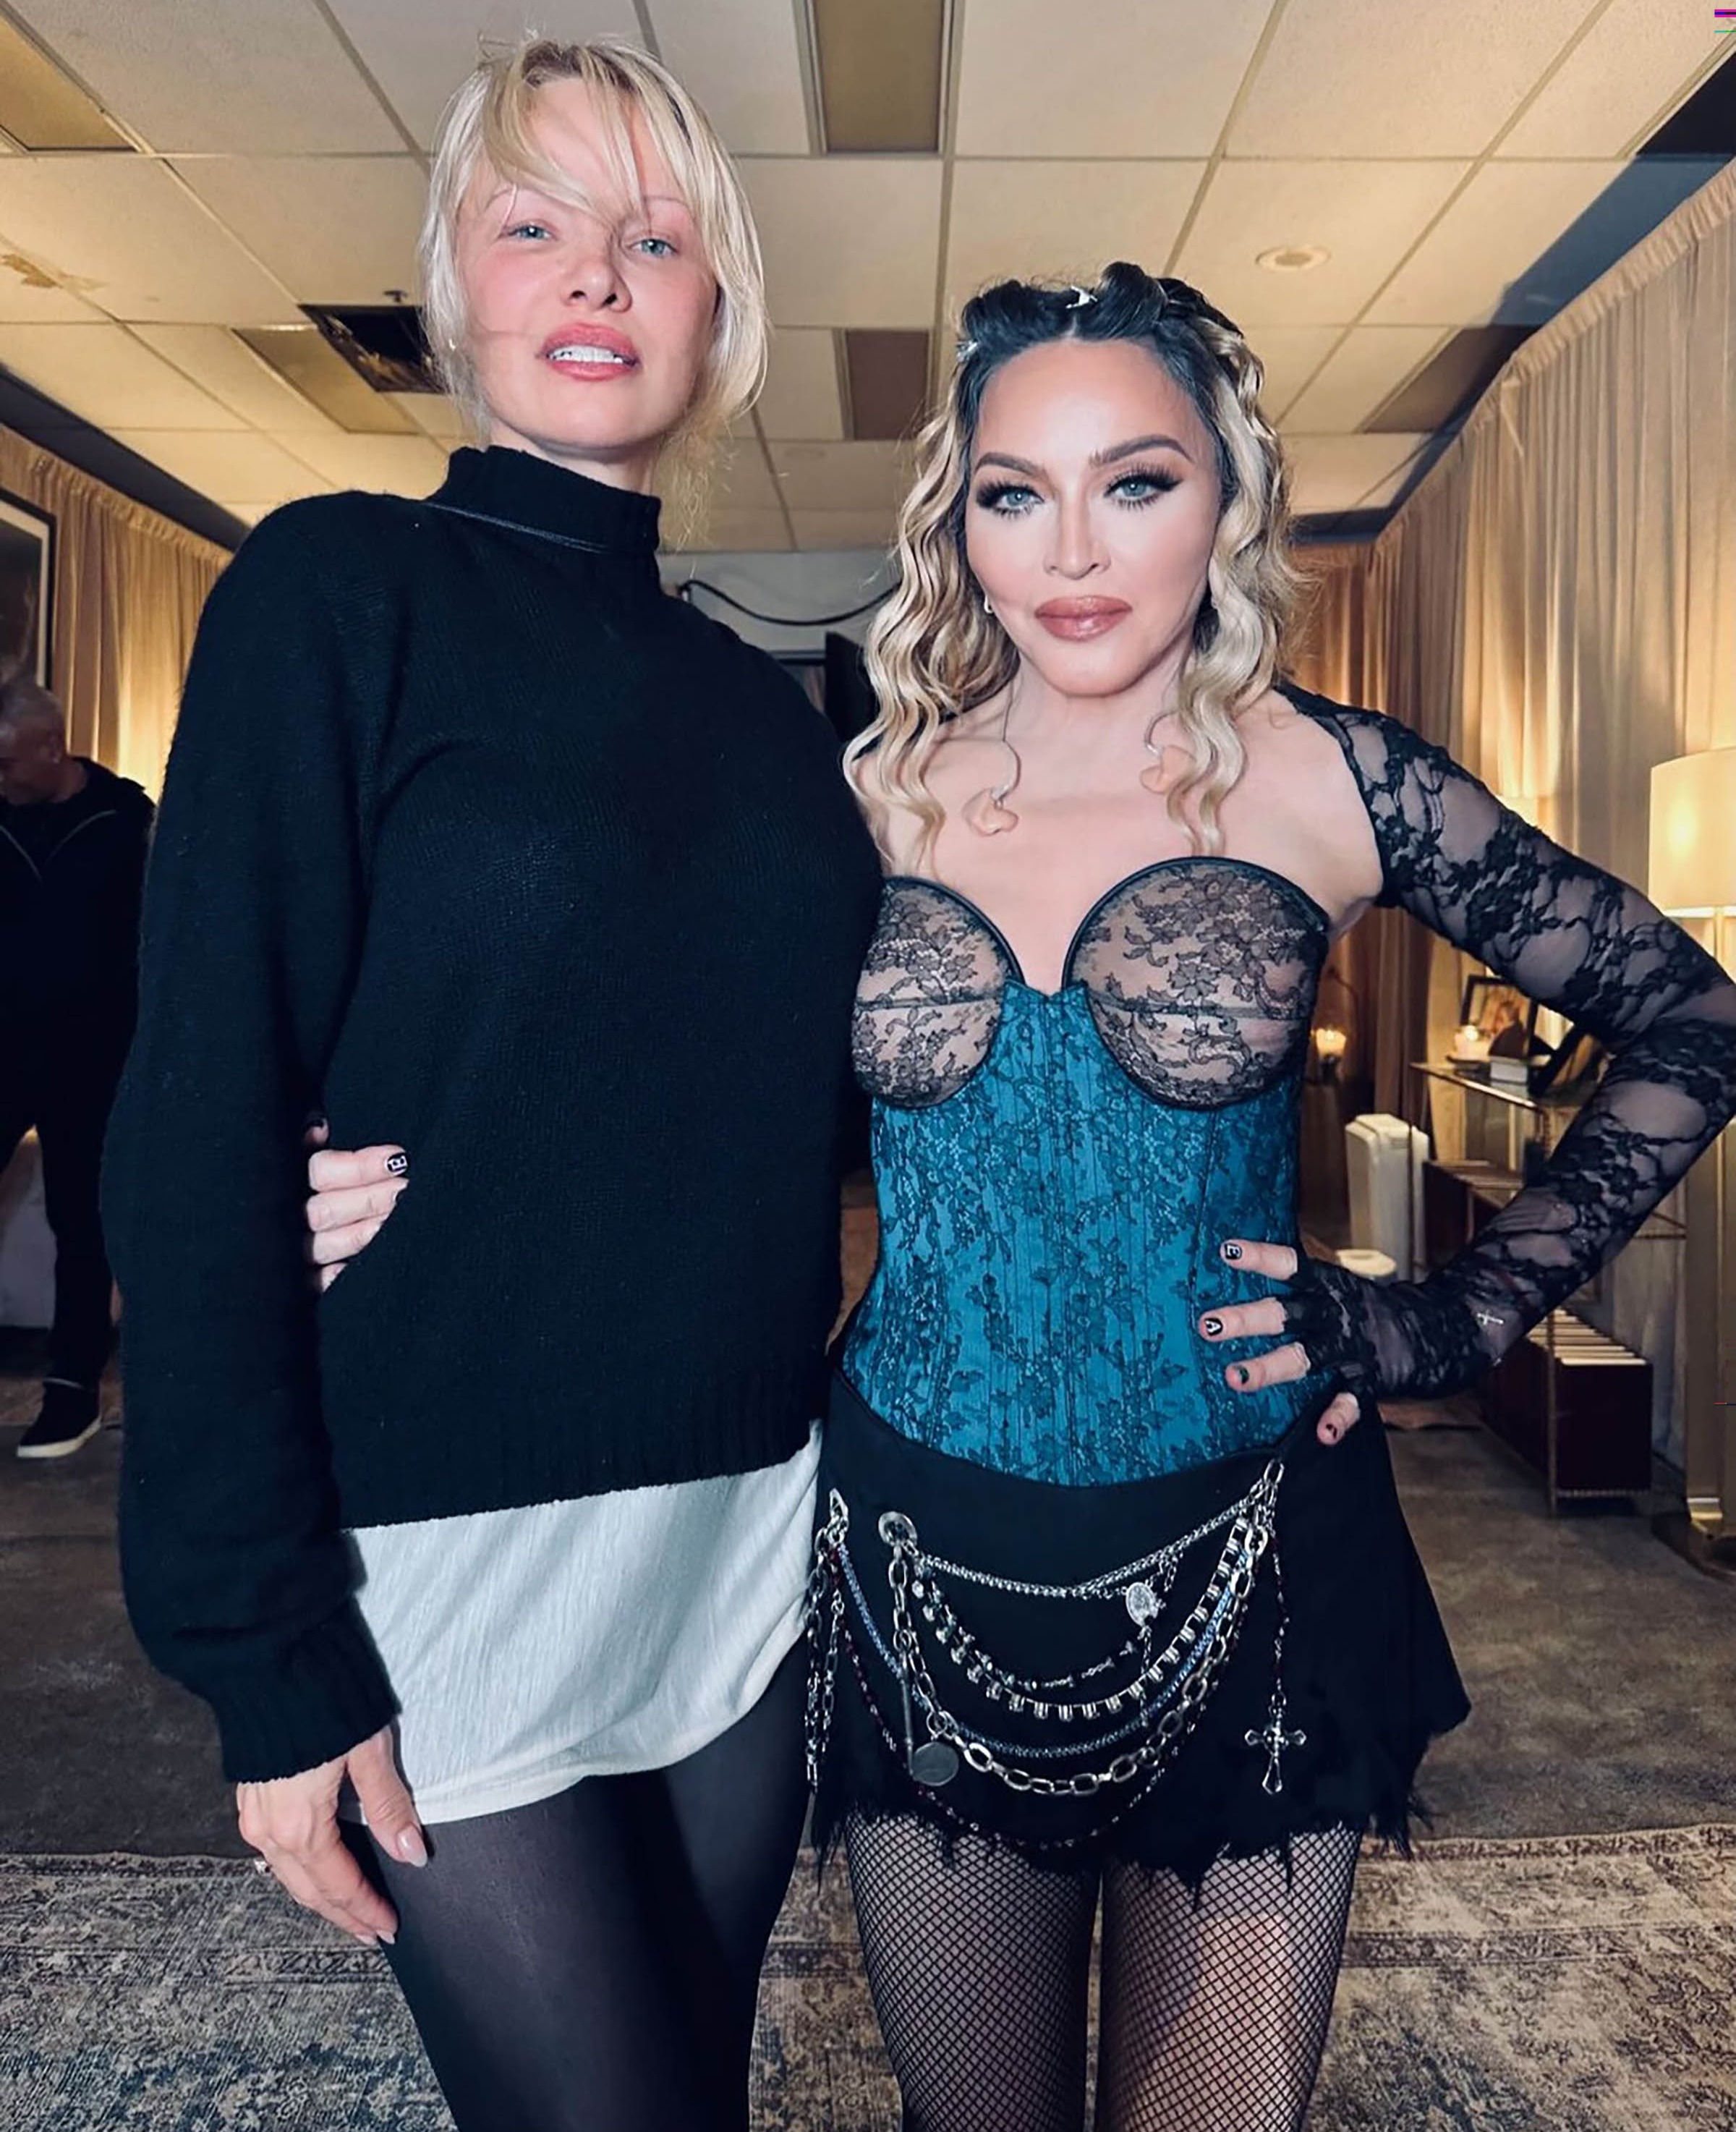 Pam and Madonna were pictured backstage after pairing up to judge dancers performing to the 1990 hit at a concert